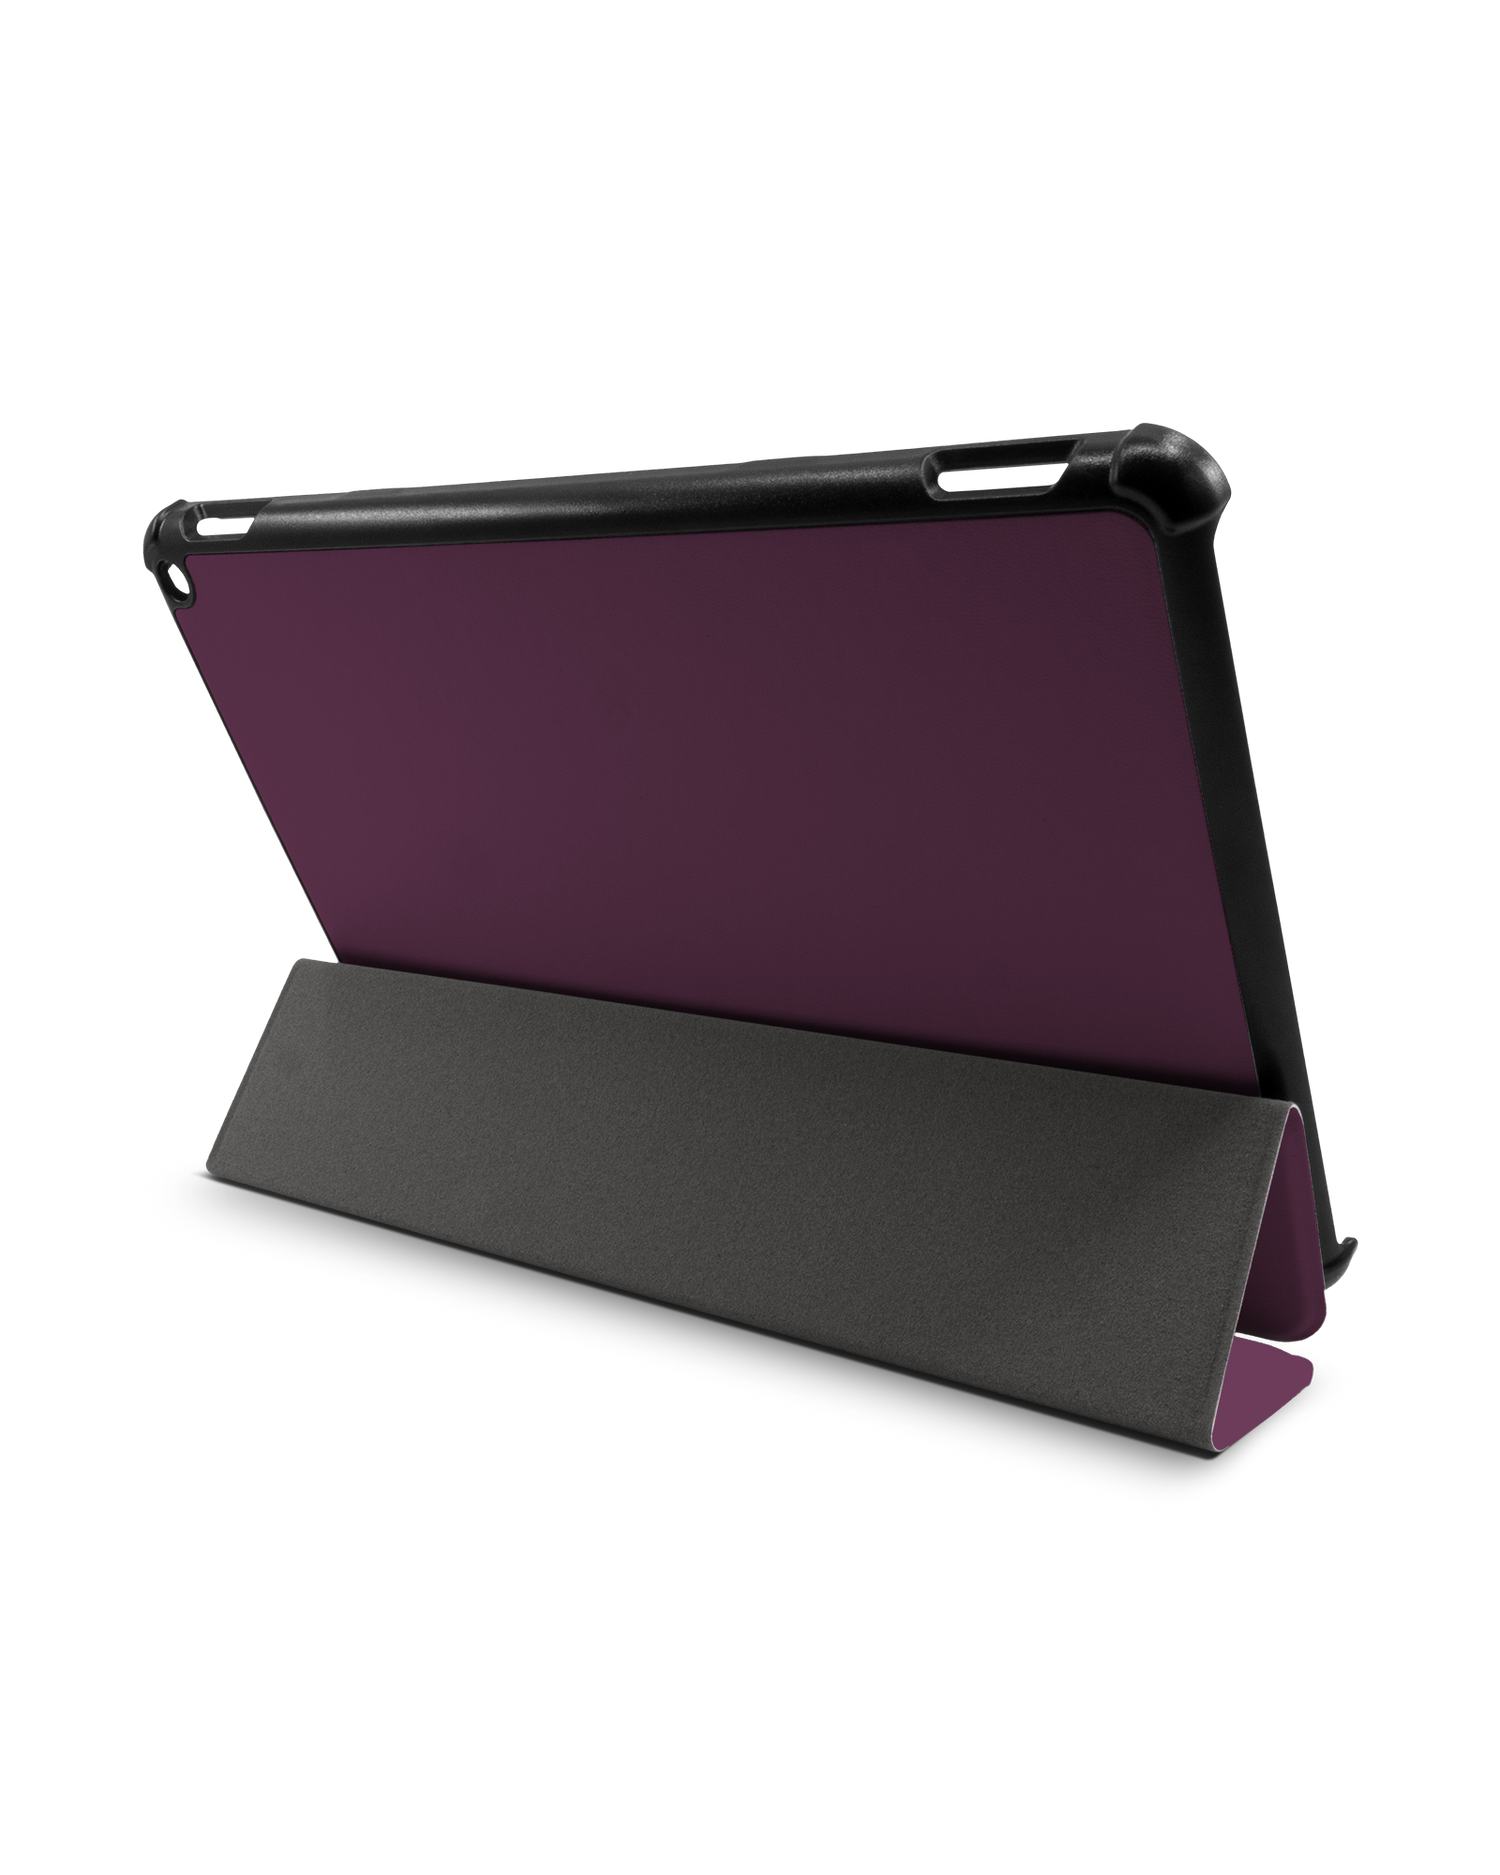 PLUM Tablet Smart Case for Amazon Fire HD 10 (2021): Used as Stand